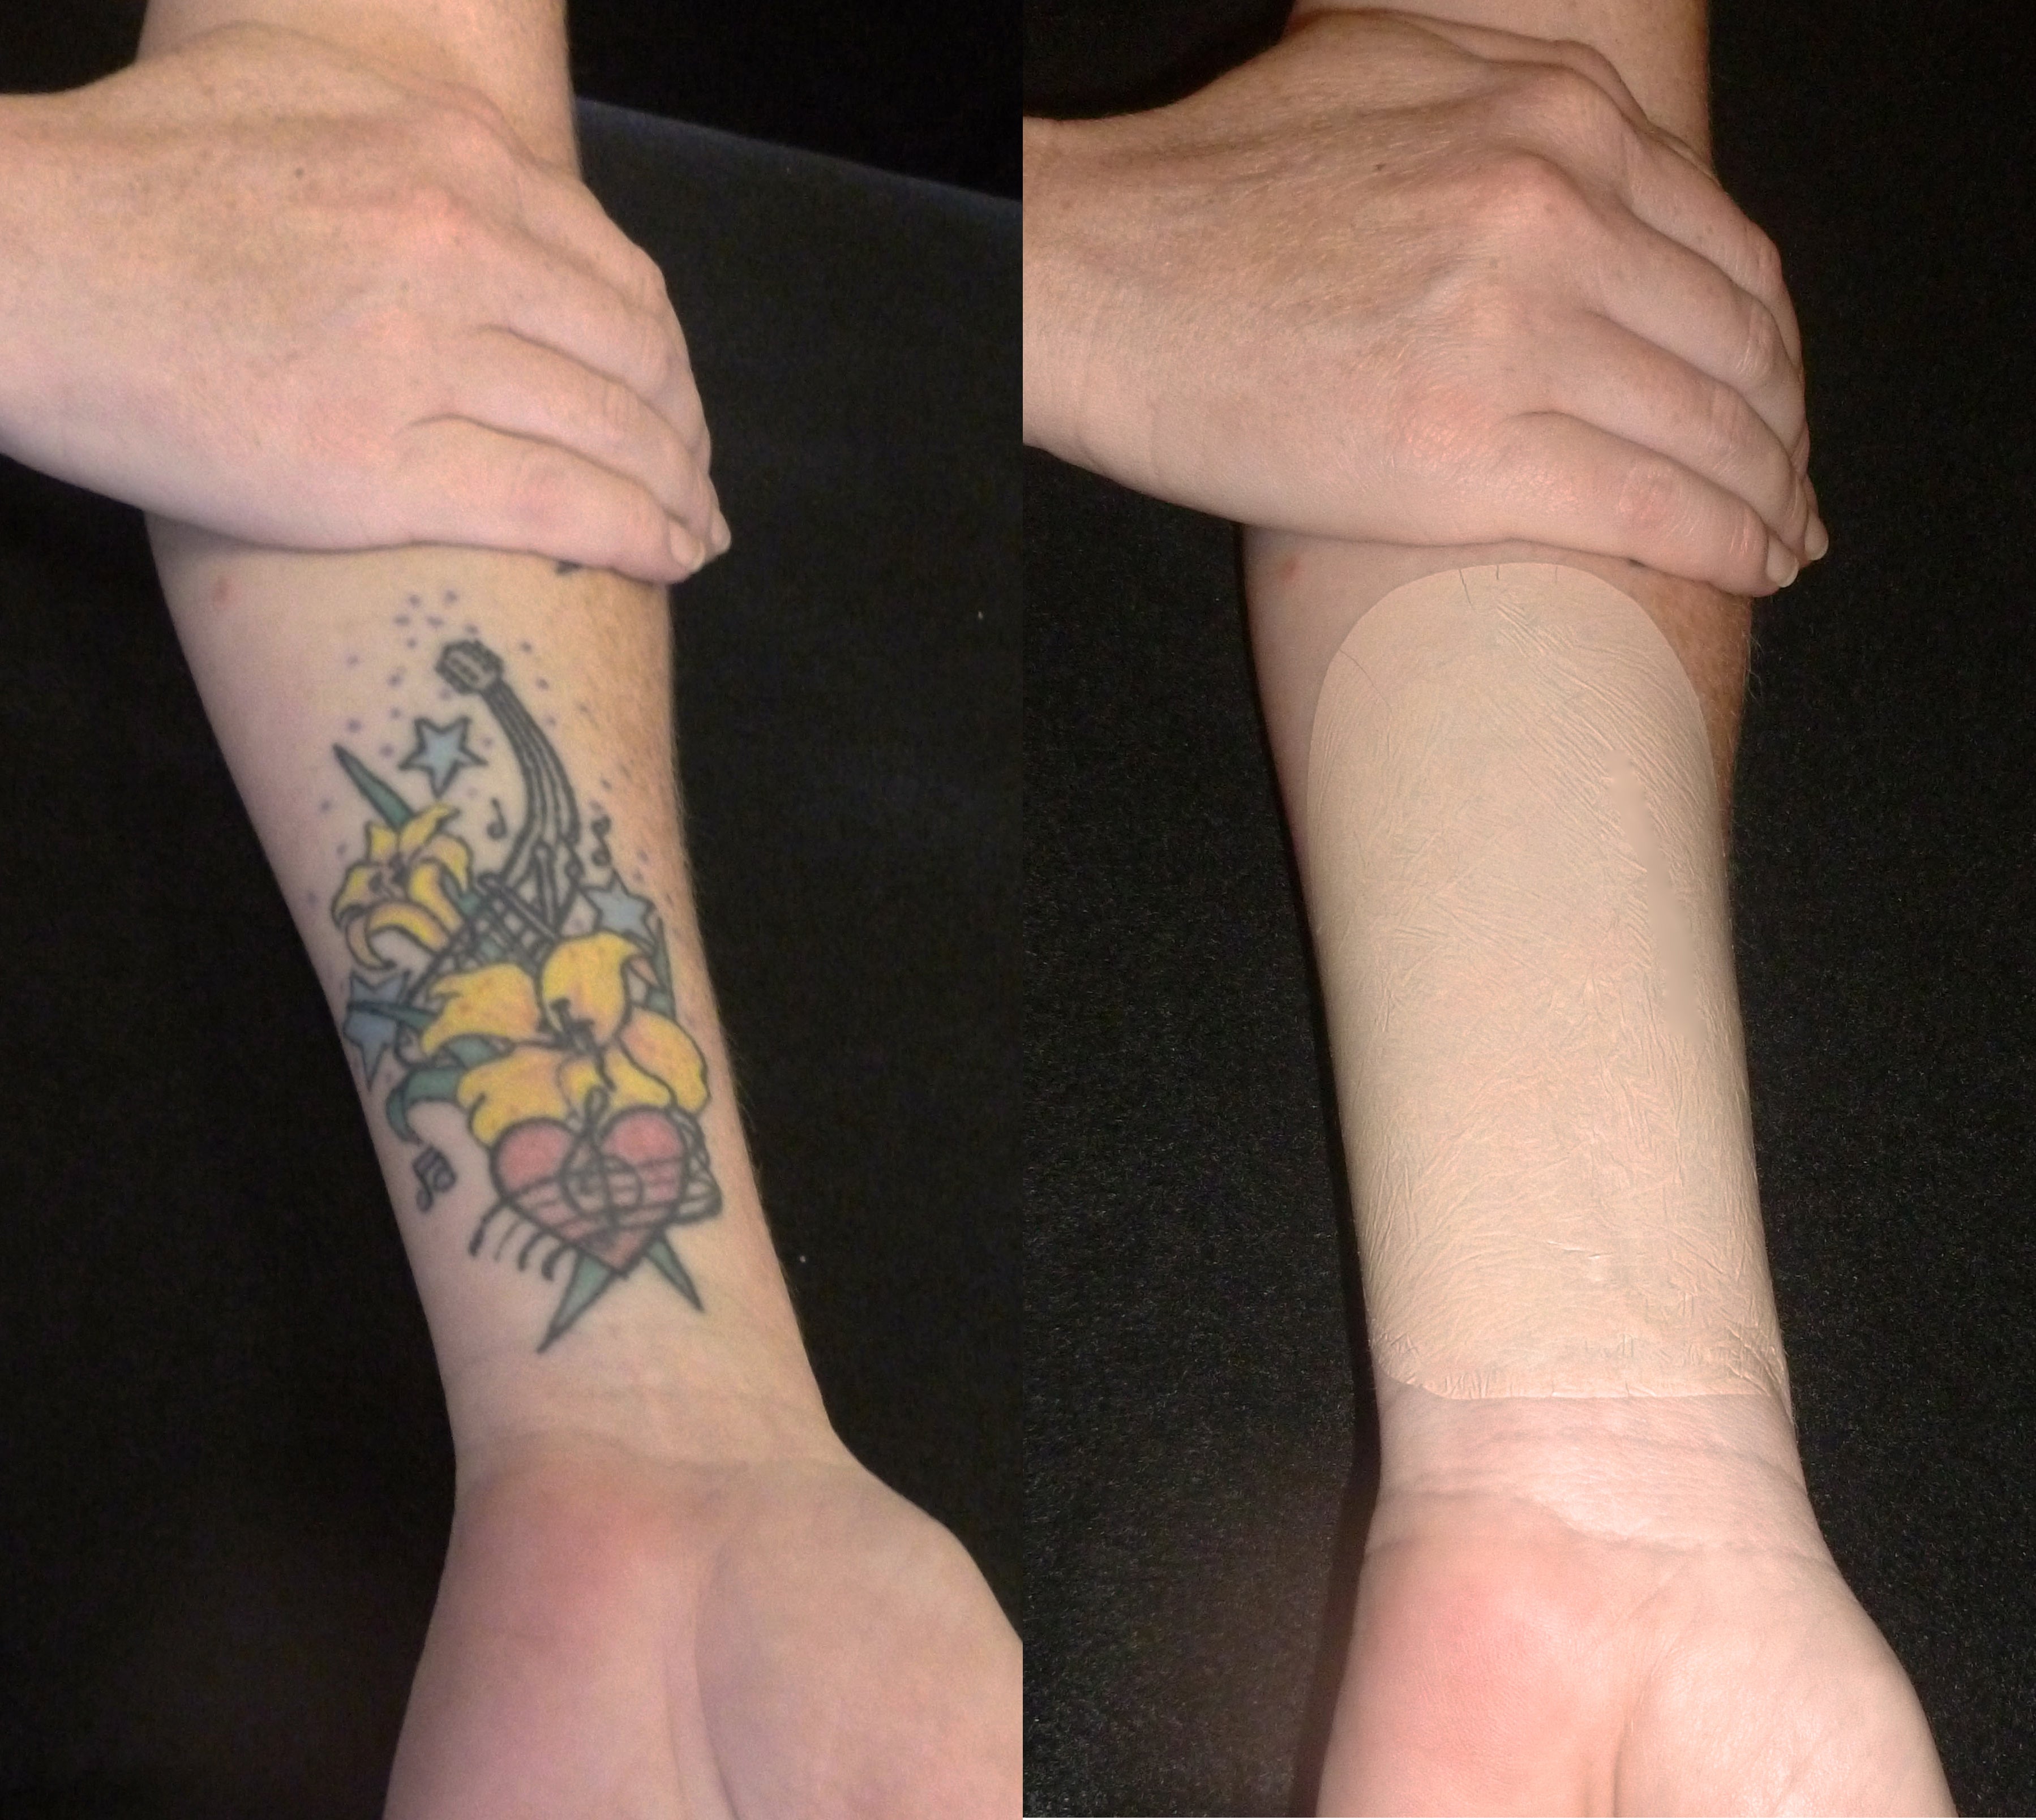 Tattoo Coverups and Tattoo Concealing